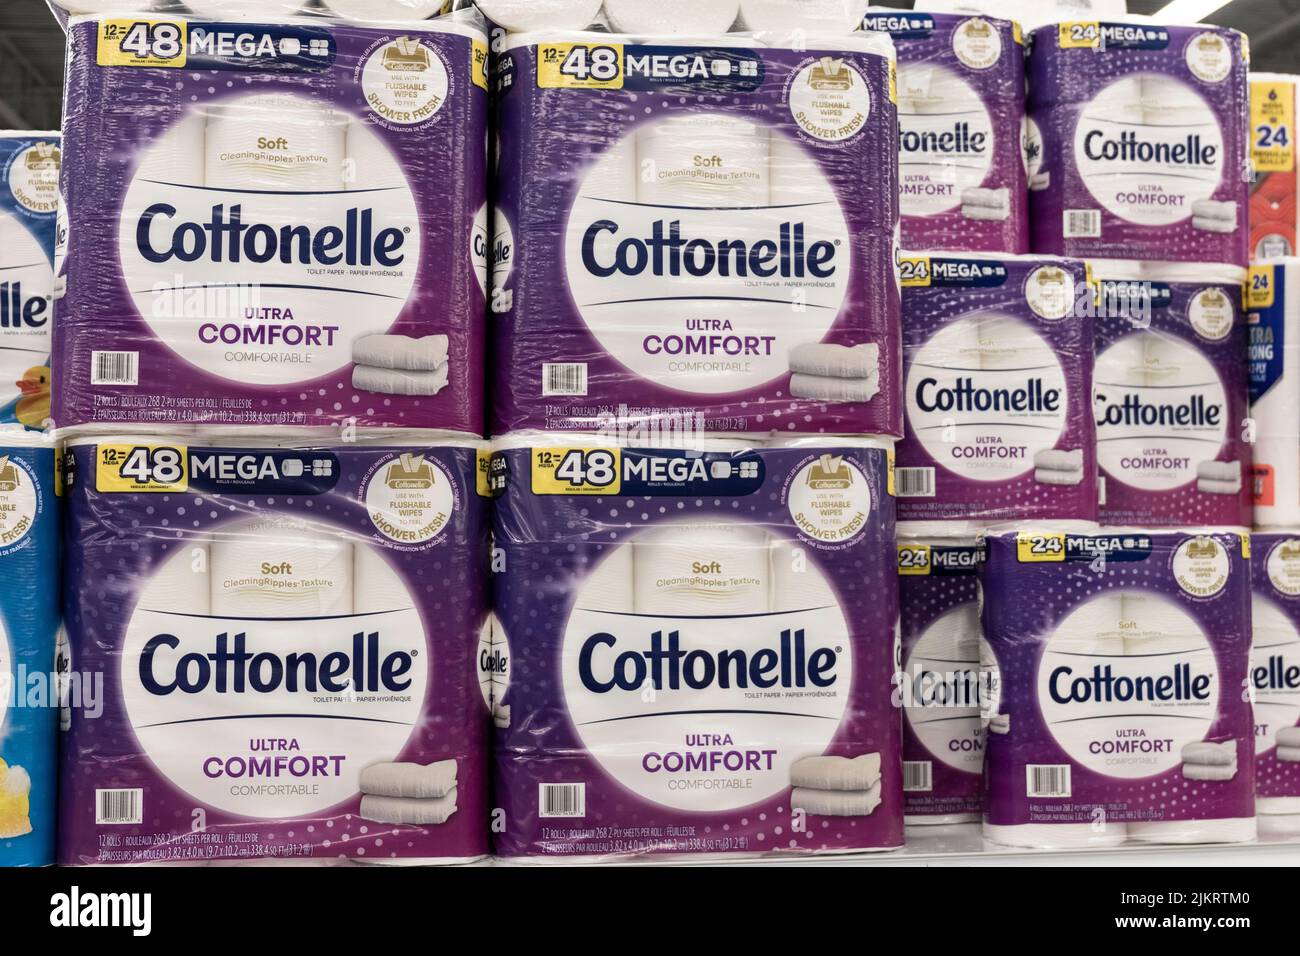 Indianapolis - Circa July 2022: Cottonelle toilet paper and toilet tissue display. Cottonelle is a hygiene product manufactured by Kimberly-Clark (KMB Stock Photo